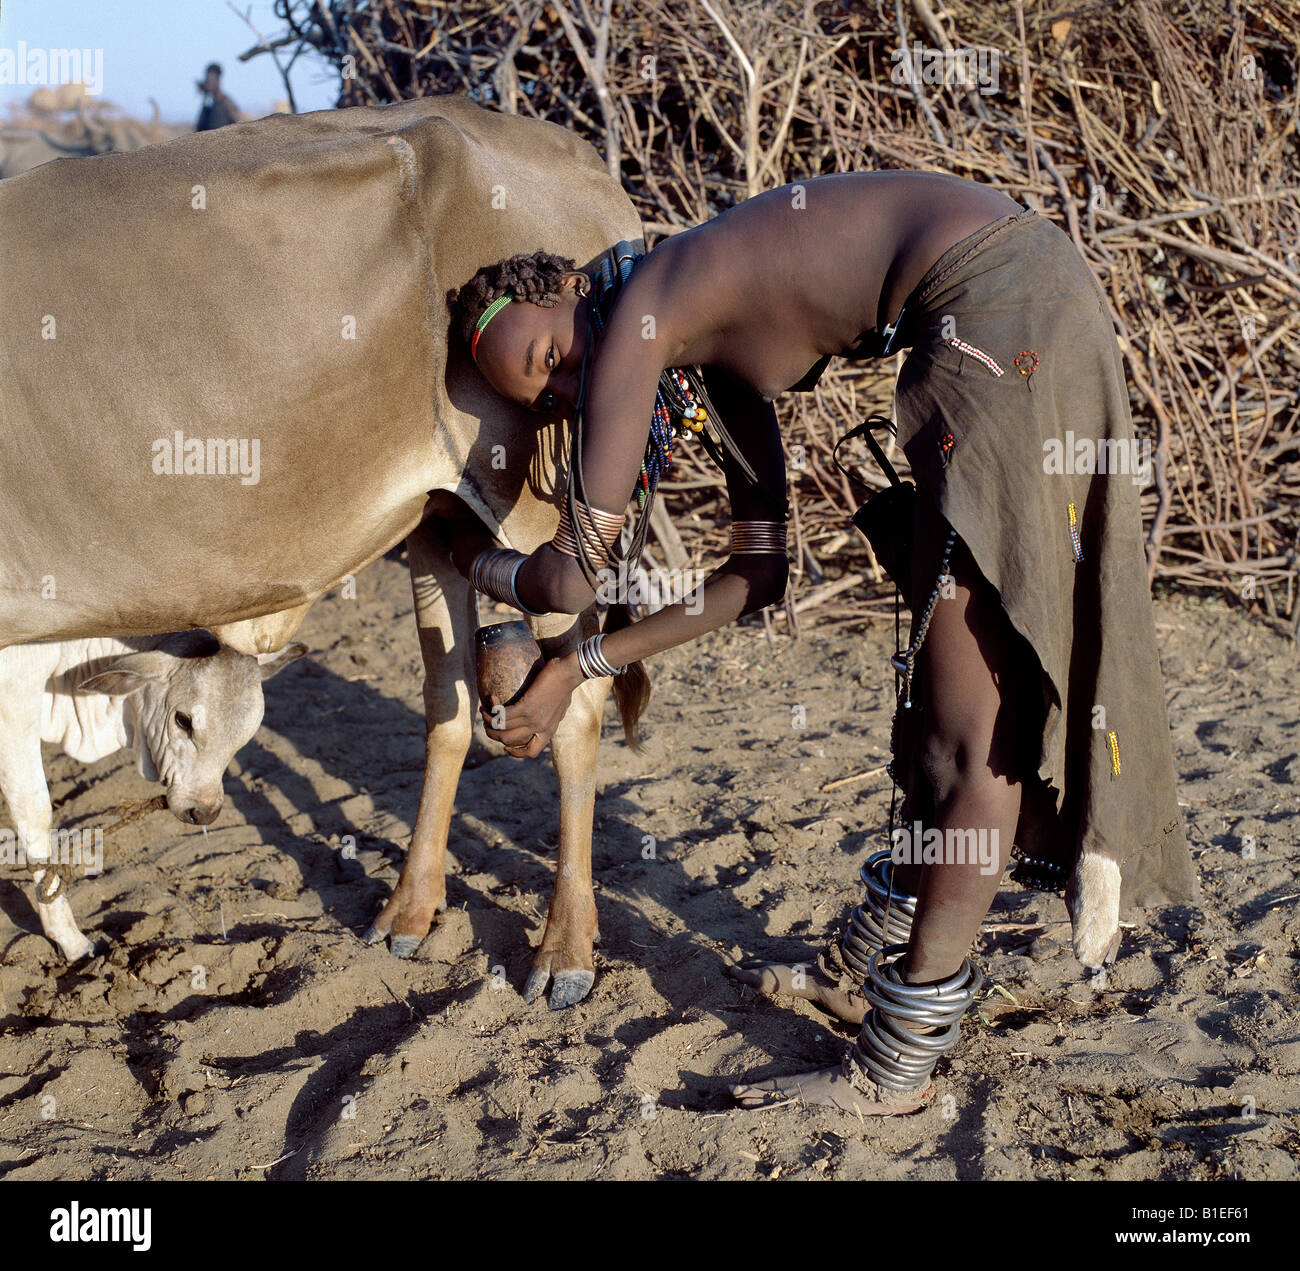 In the early morning, a Dassanech girl milks a cow outside a settlement of the Dassanech people in the Omo Delta. Stock Photo